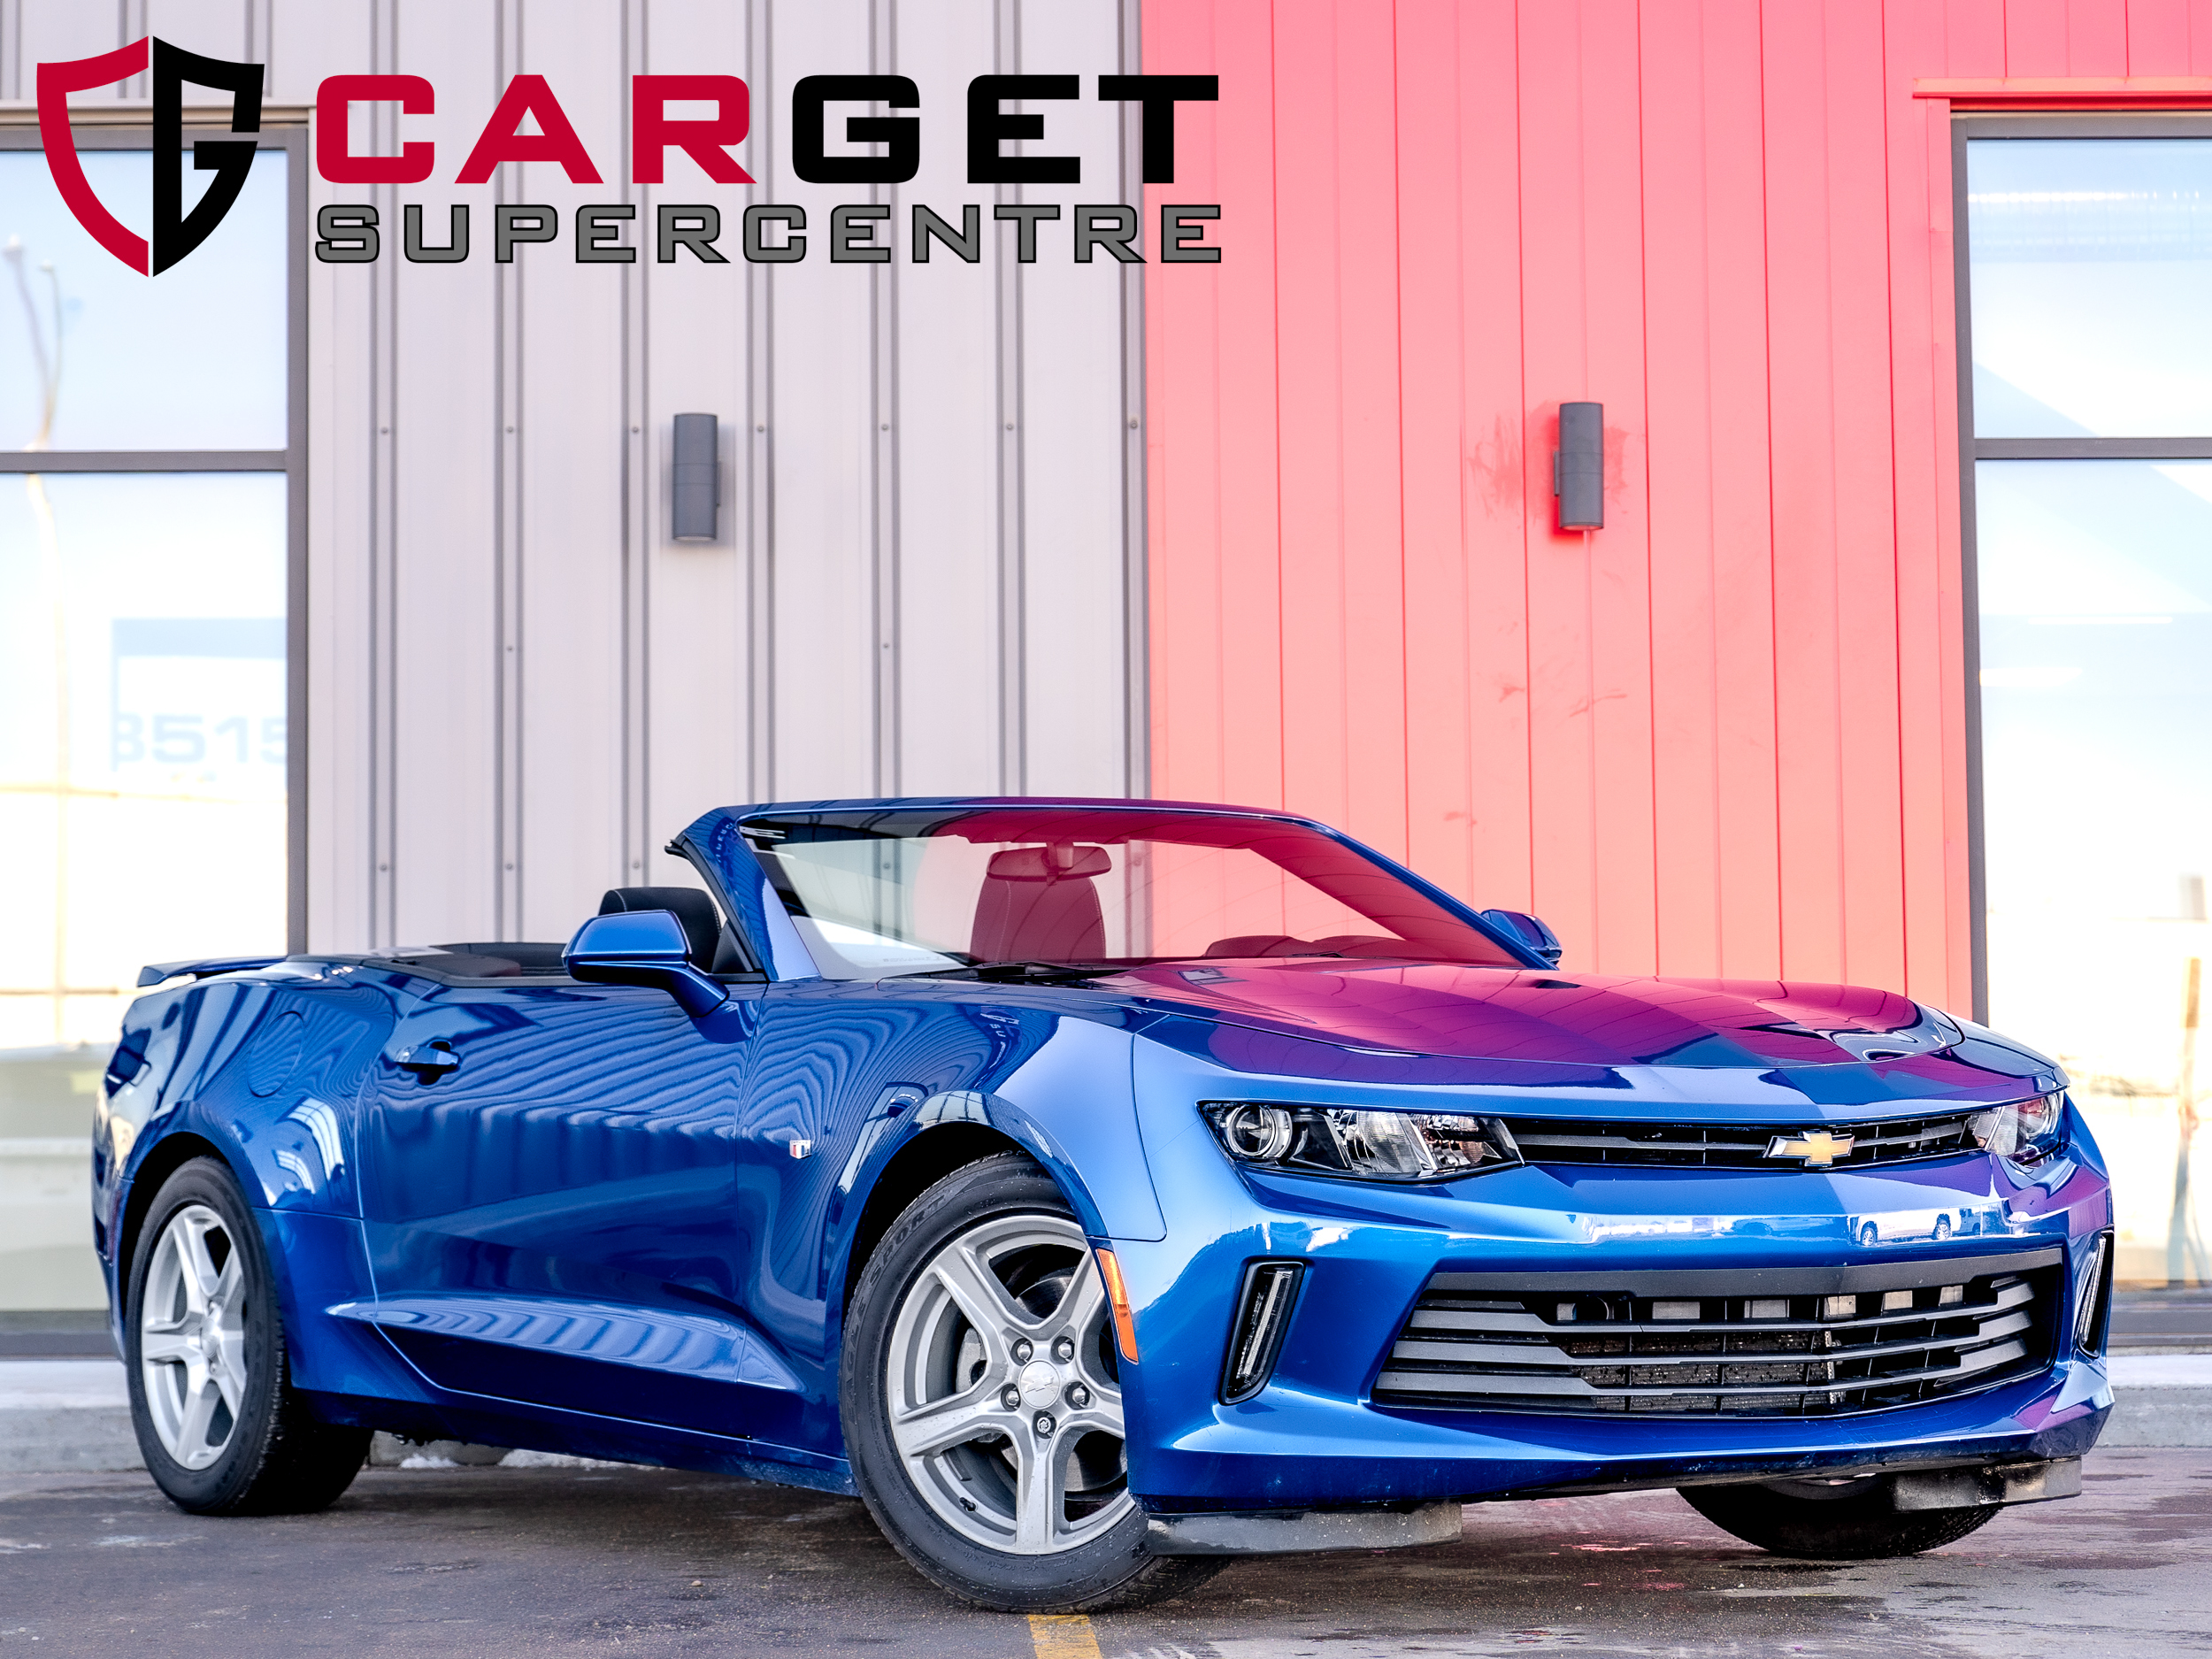 2018 Chevrolet Camaro LT - Convertible | Low KM | One Owner | Backup Cam